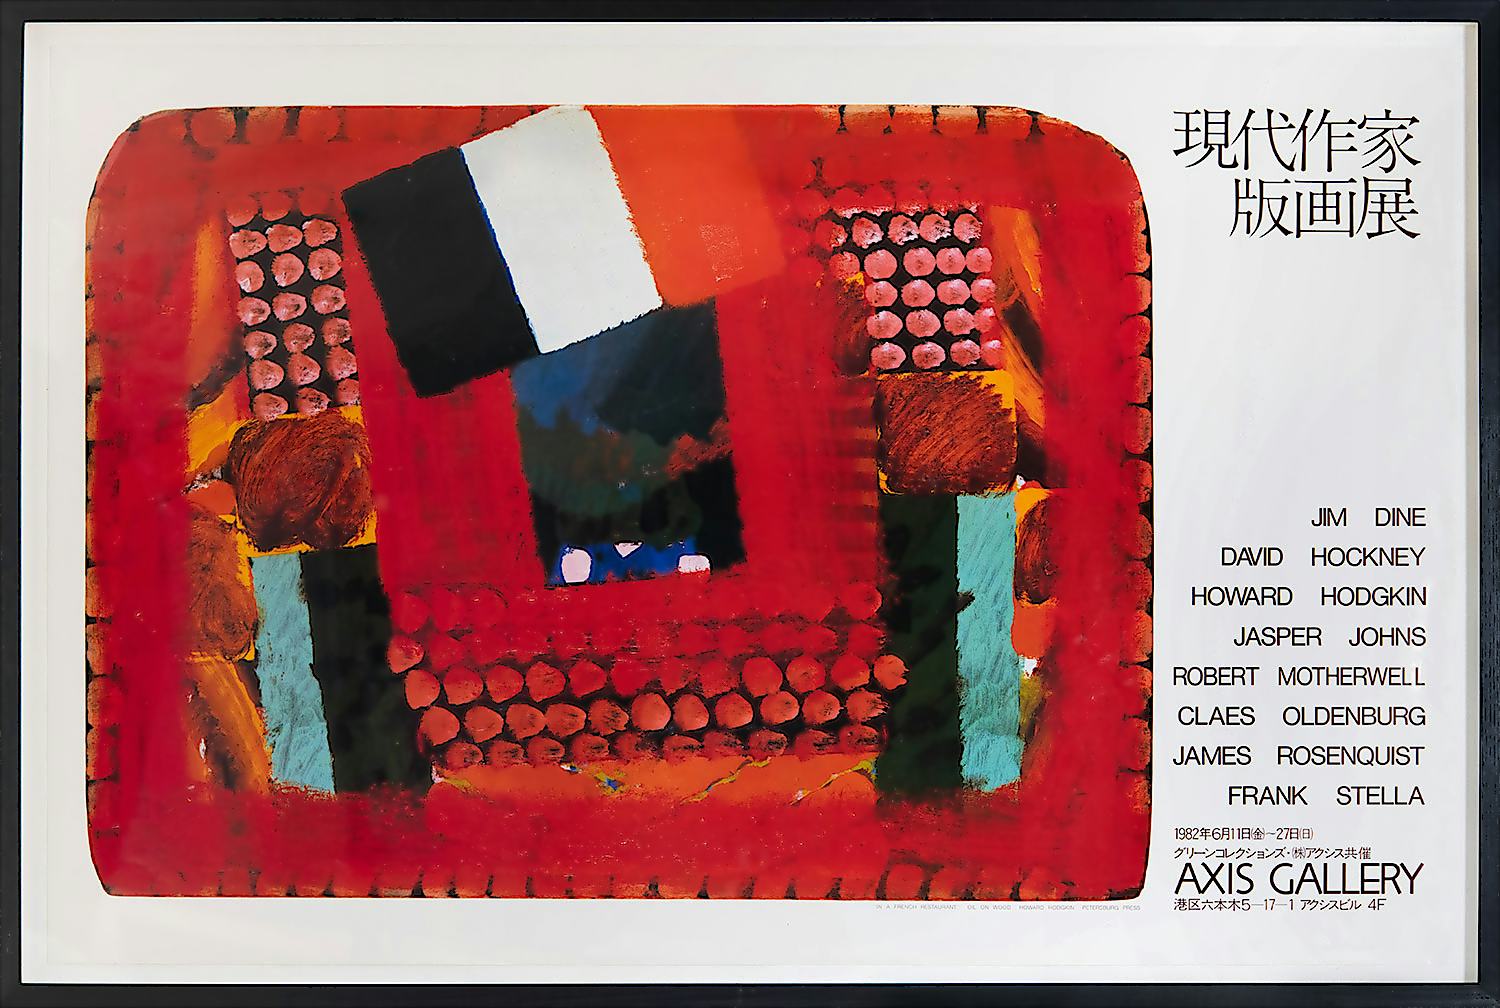 In a French Restaurant, 1982 by Sir Howard Hodgkin